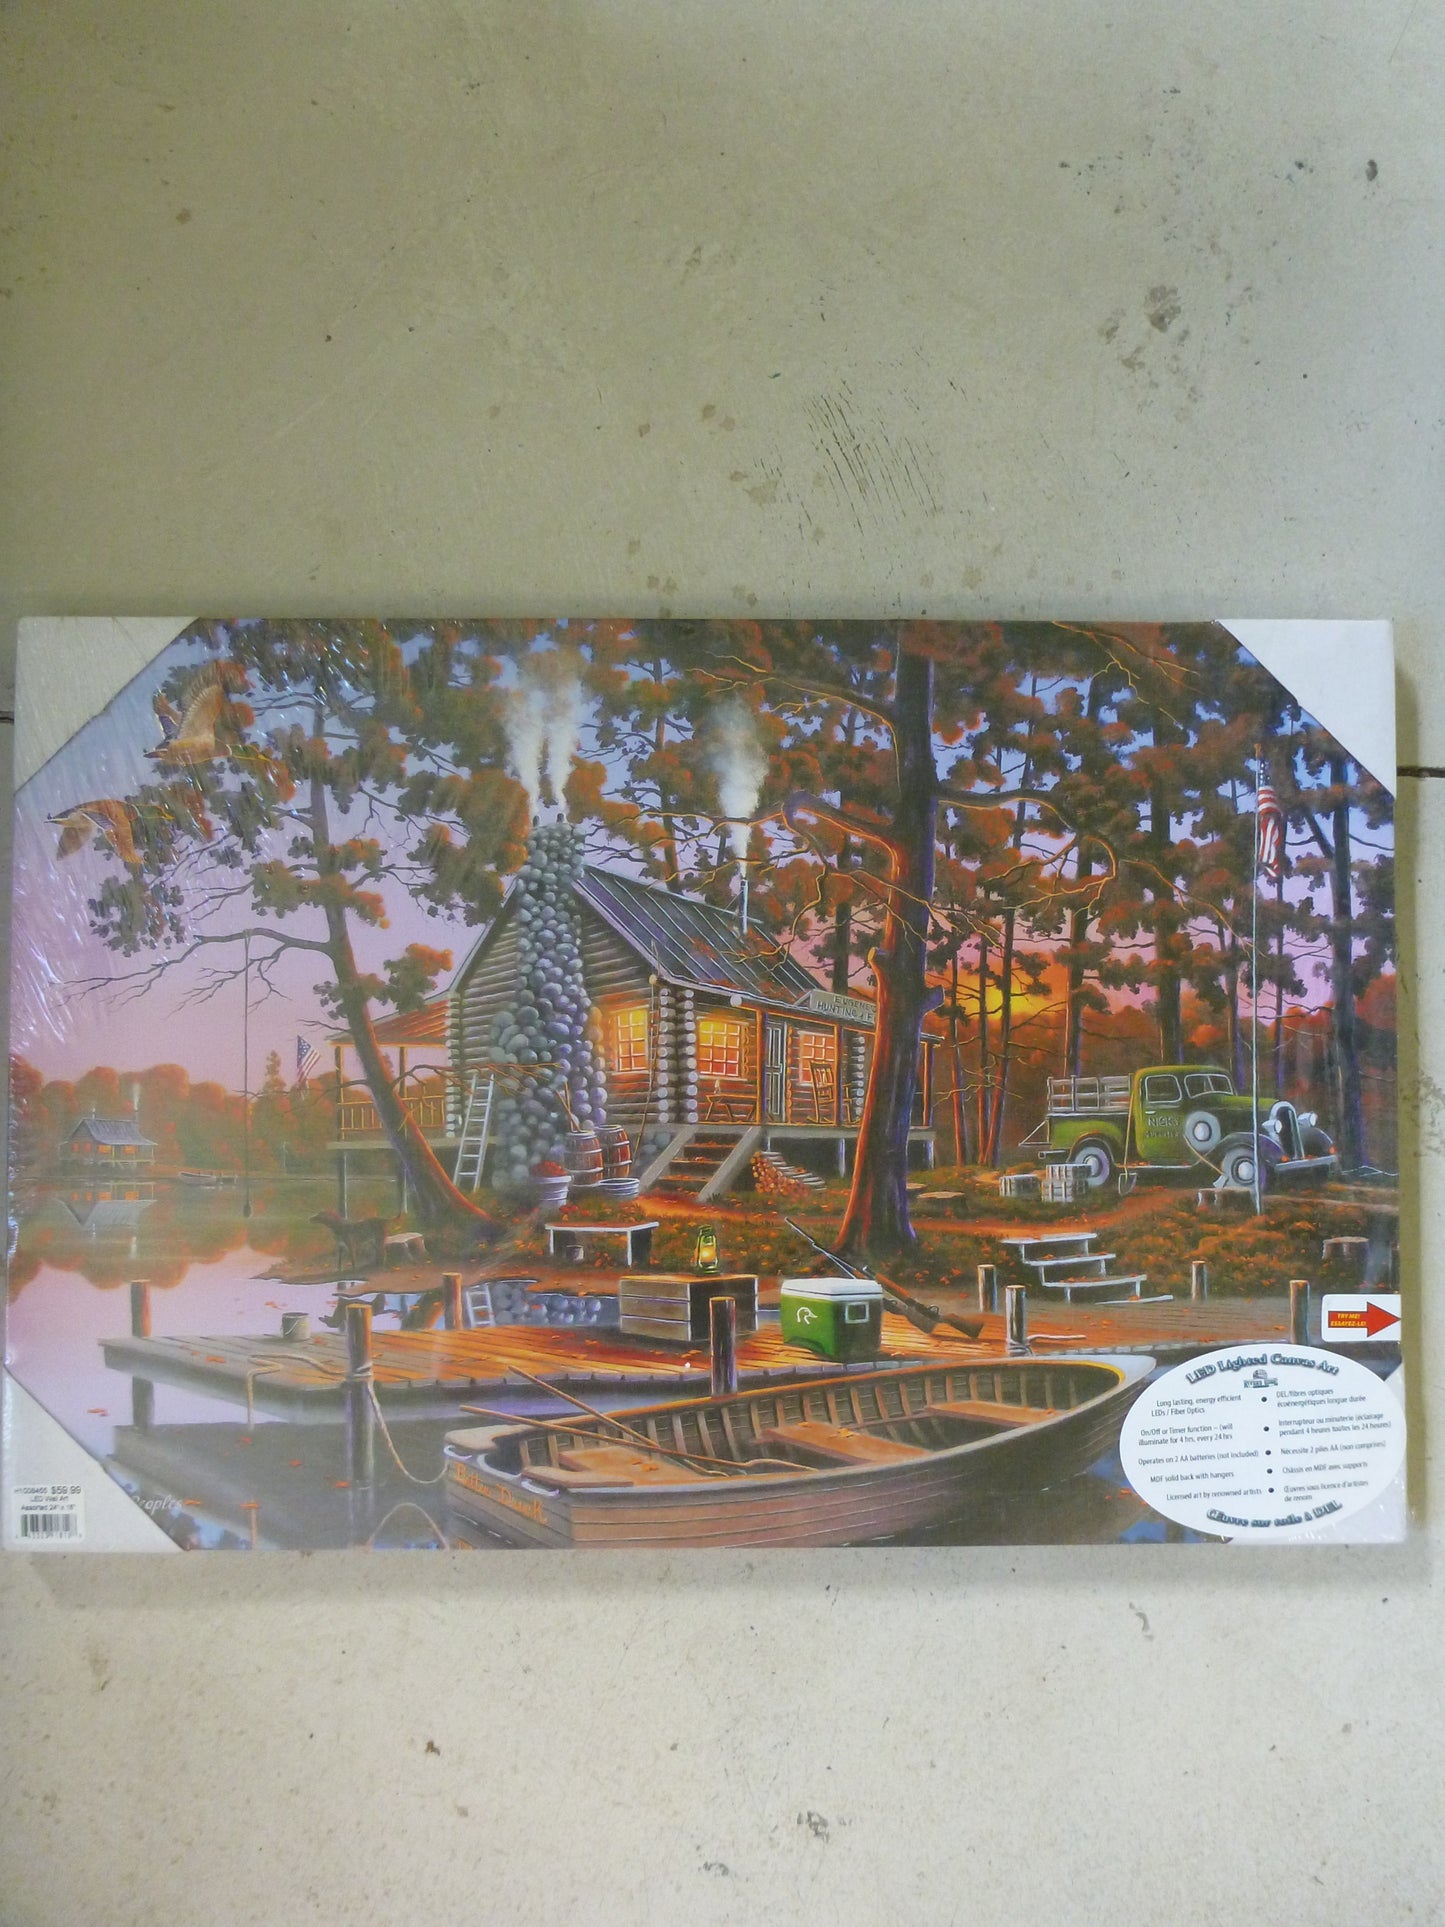 LED Wall Art 24" x 16" - Cottage & Boat At A Dock